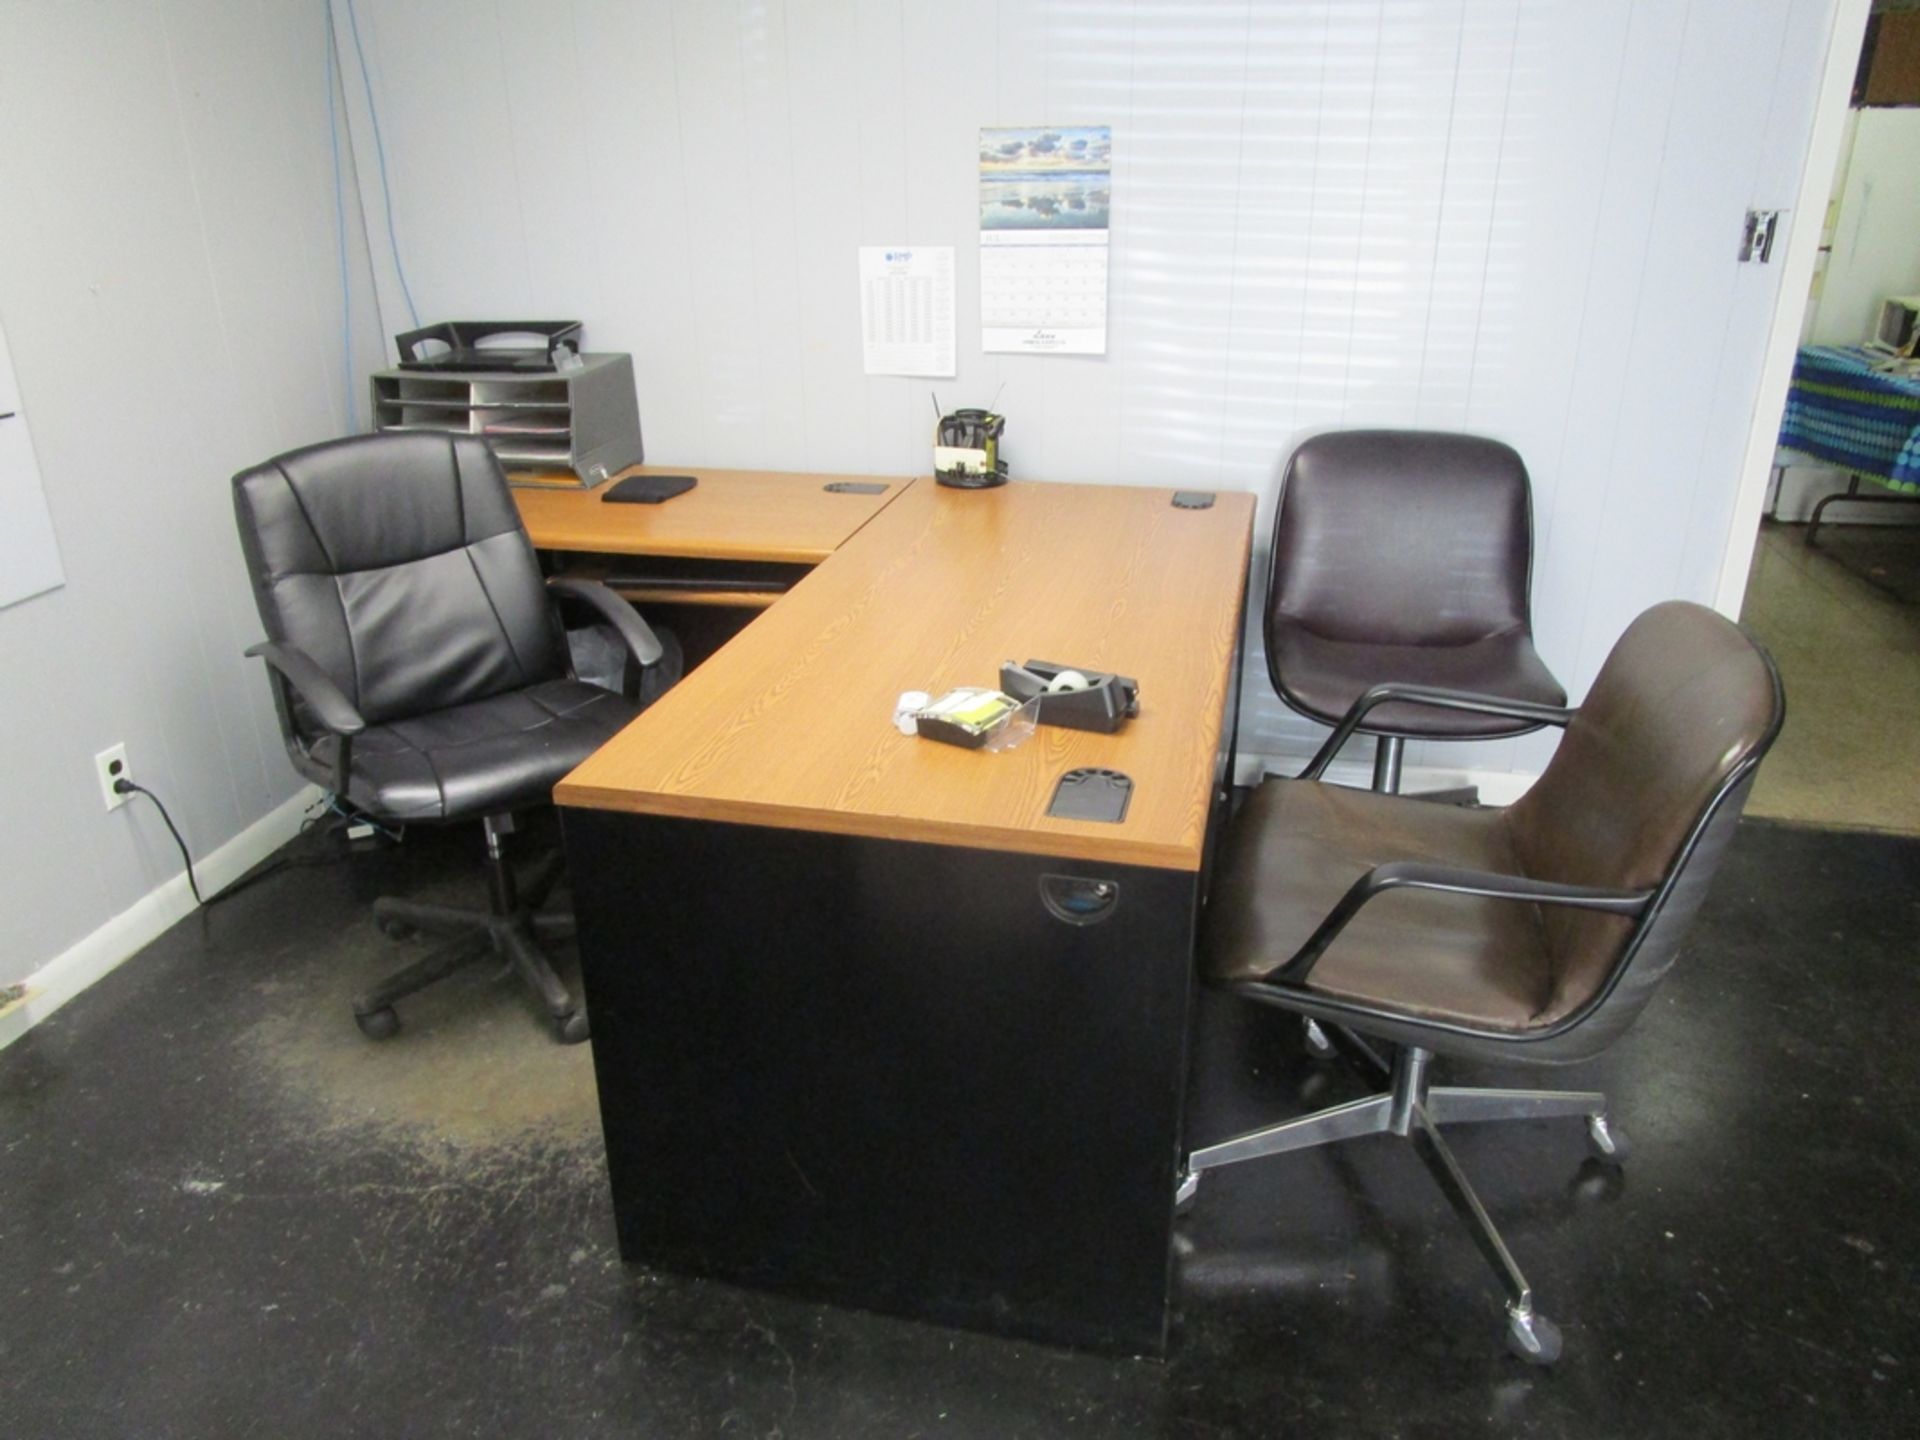 Office Furniture, L-Shaped Desk, (3) Chairs, Round Table, Toaster Oven - Image 2 of 2